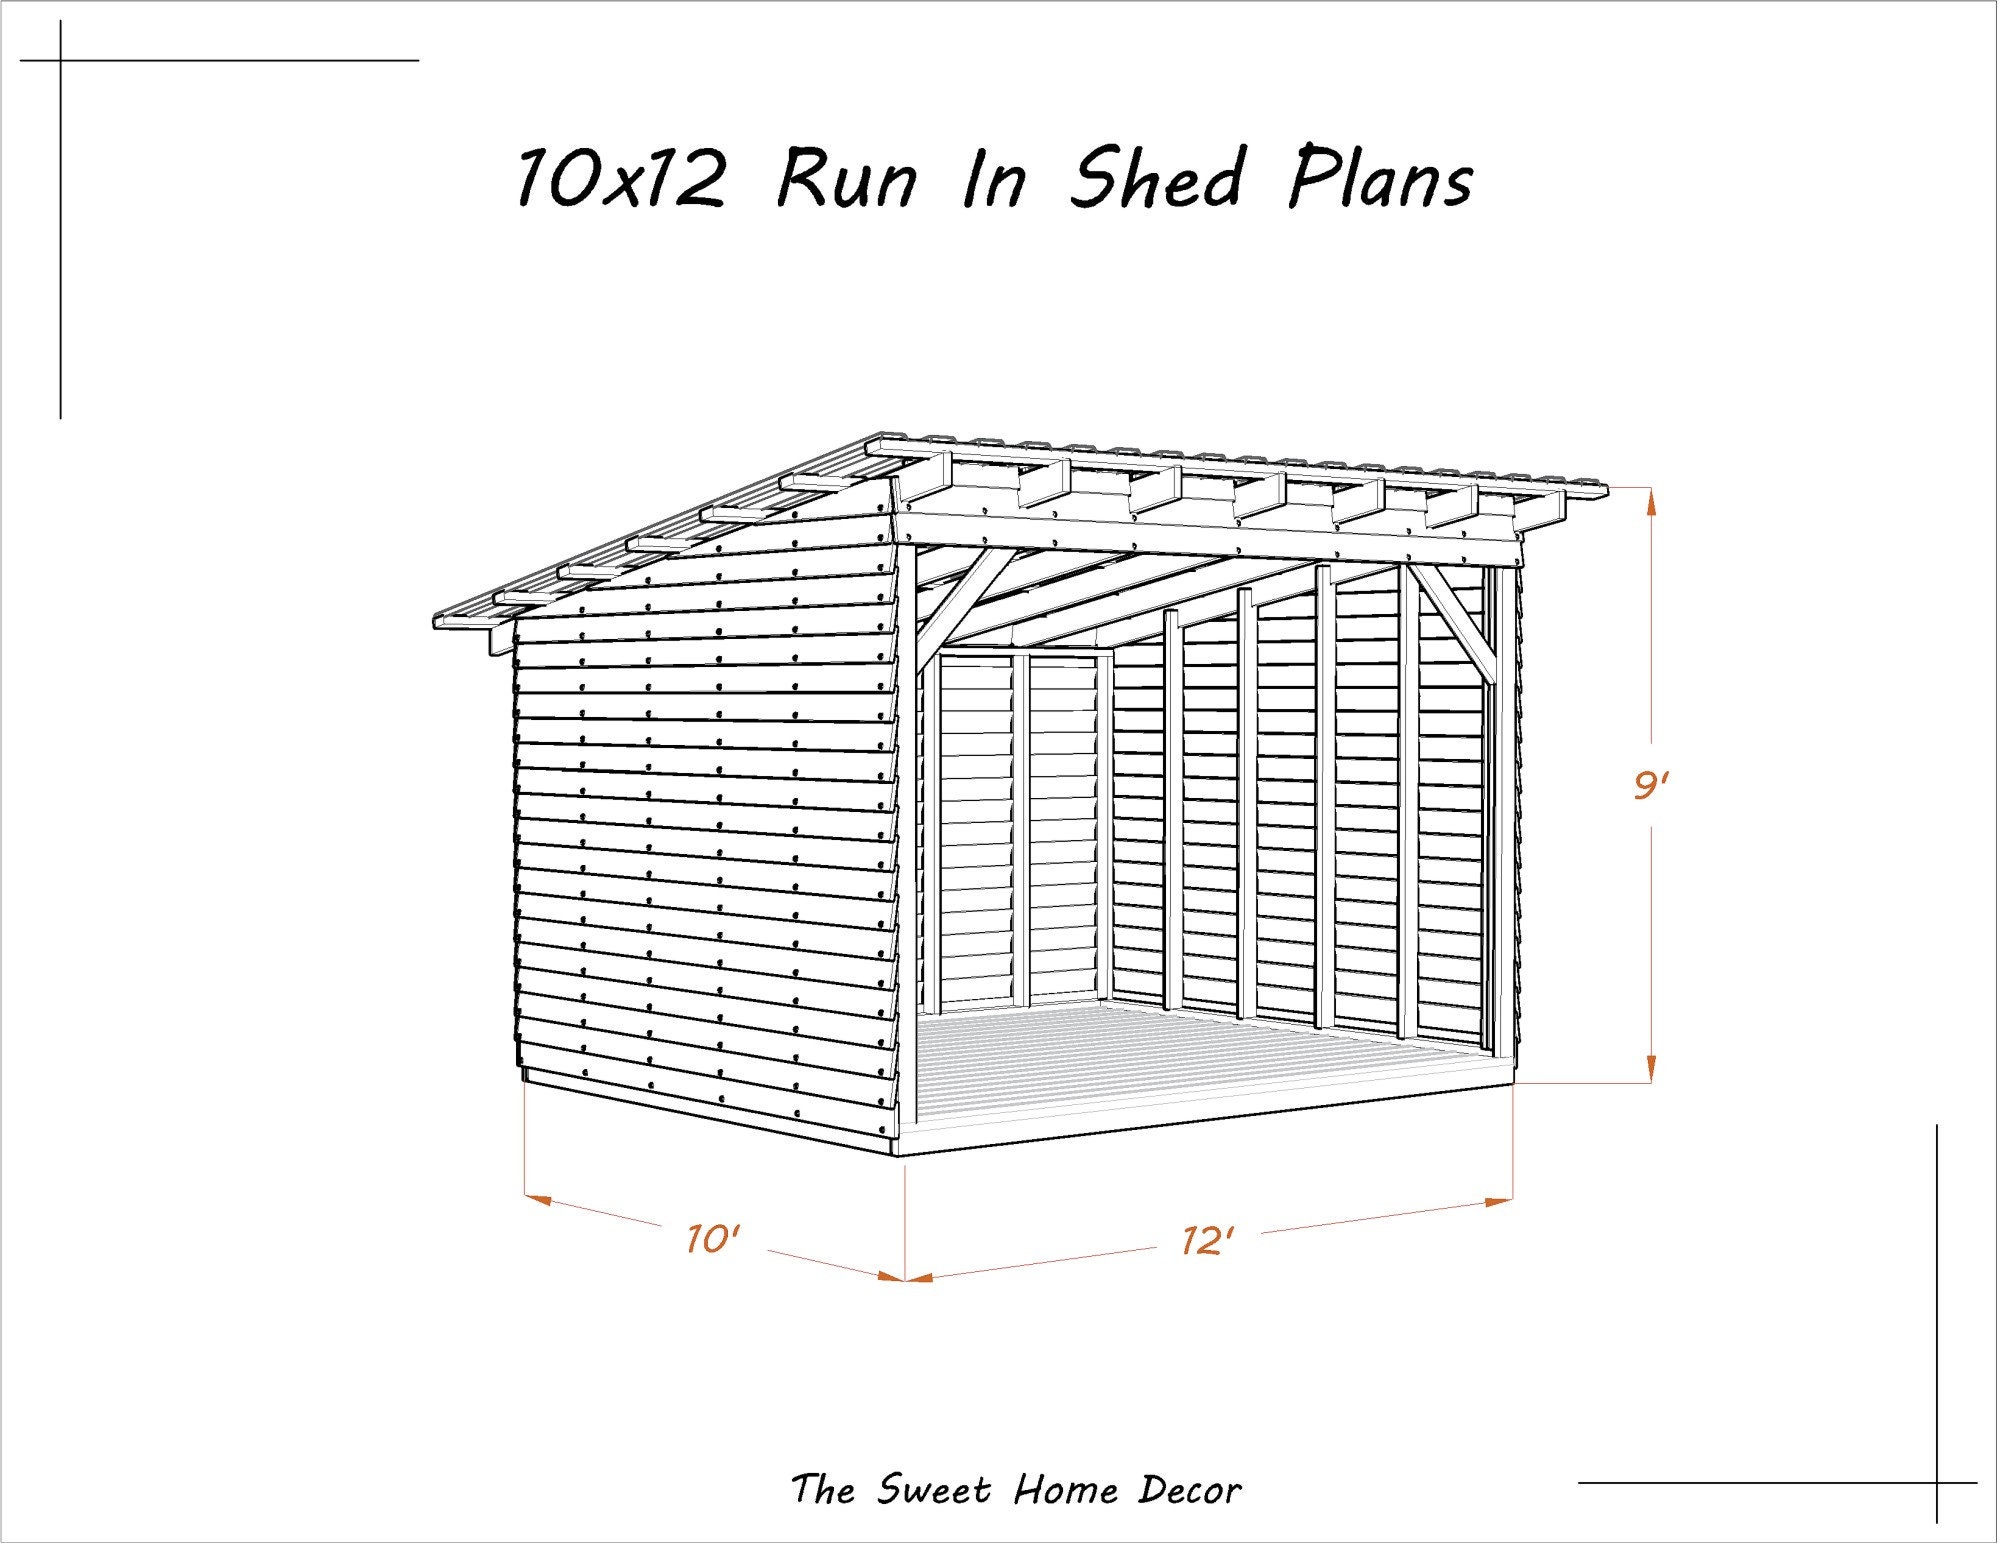 Diy 10x12 Run in shed plans in pdf. Diy garden shed plans. Etsy